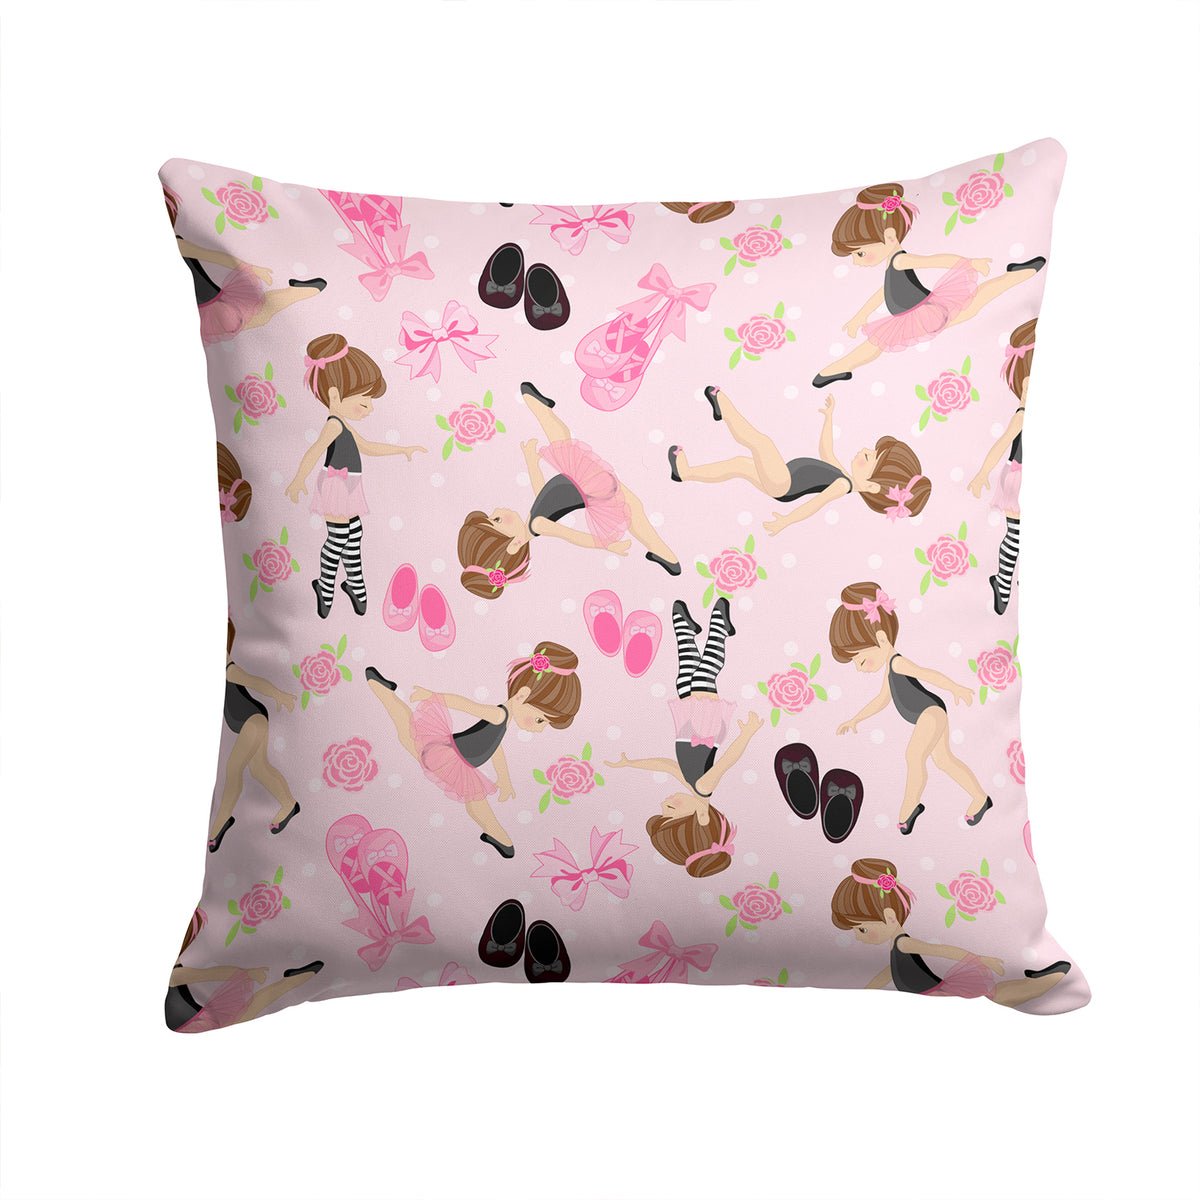 Ballerinas and Roses Fabric Decorative Pillow BB5172PW1414 - the-store.com